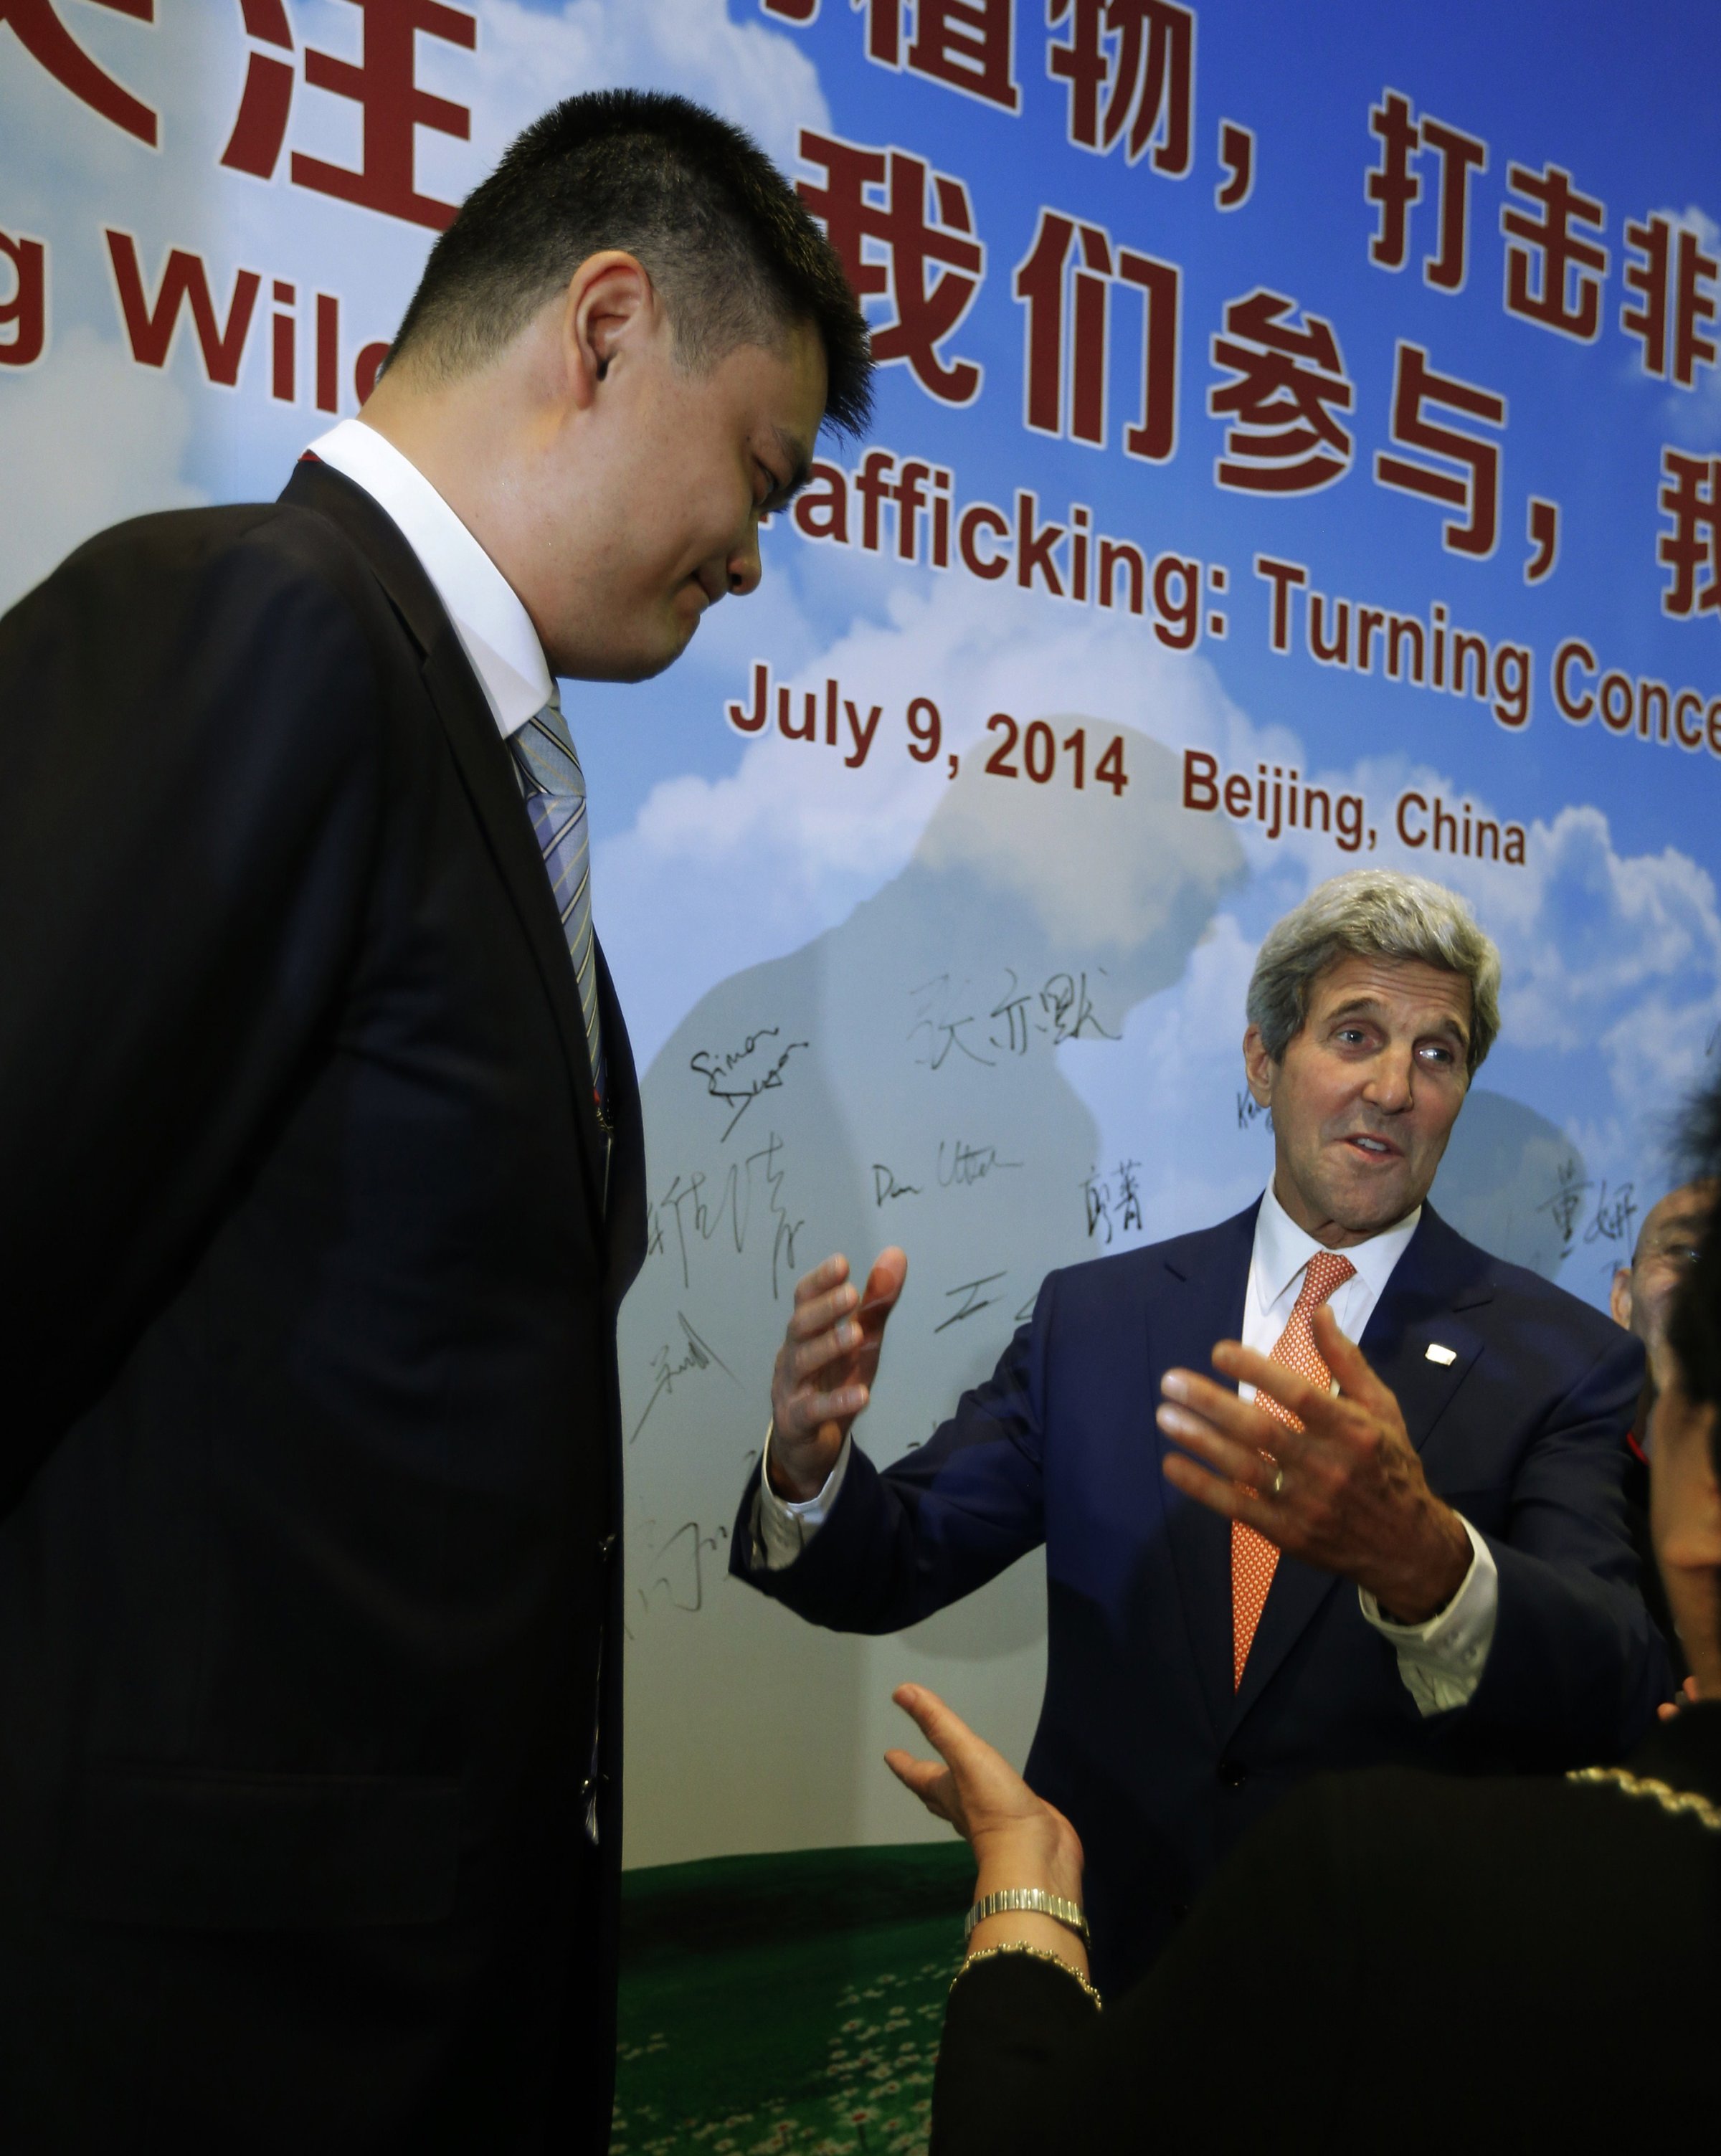 US Secretary of State John Kerry talks with retired Chinese NBA basketball star Yao Ming about his efforts against international wildlife trafficking, as the two participate in an event about combating the trade of animal remains, at the US-China Strategic and Economic Dialogue talks at the Diaoyutai State Guesthouse in Beijing on July 9, 2014.